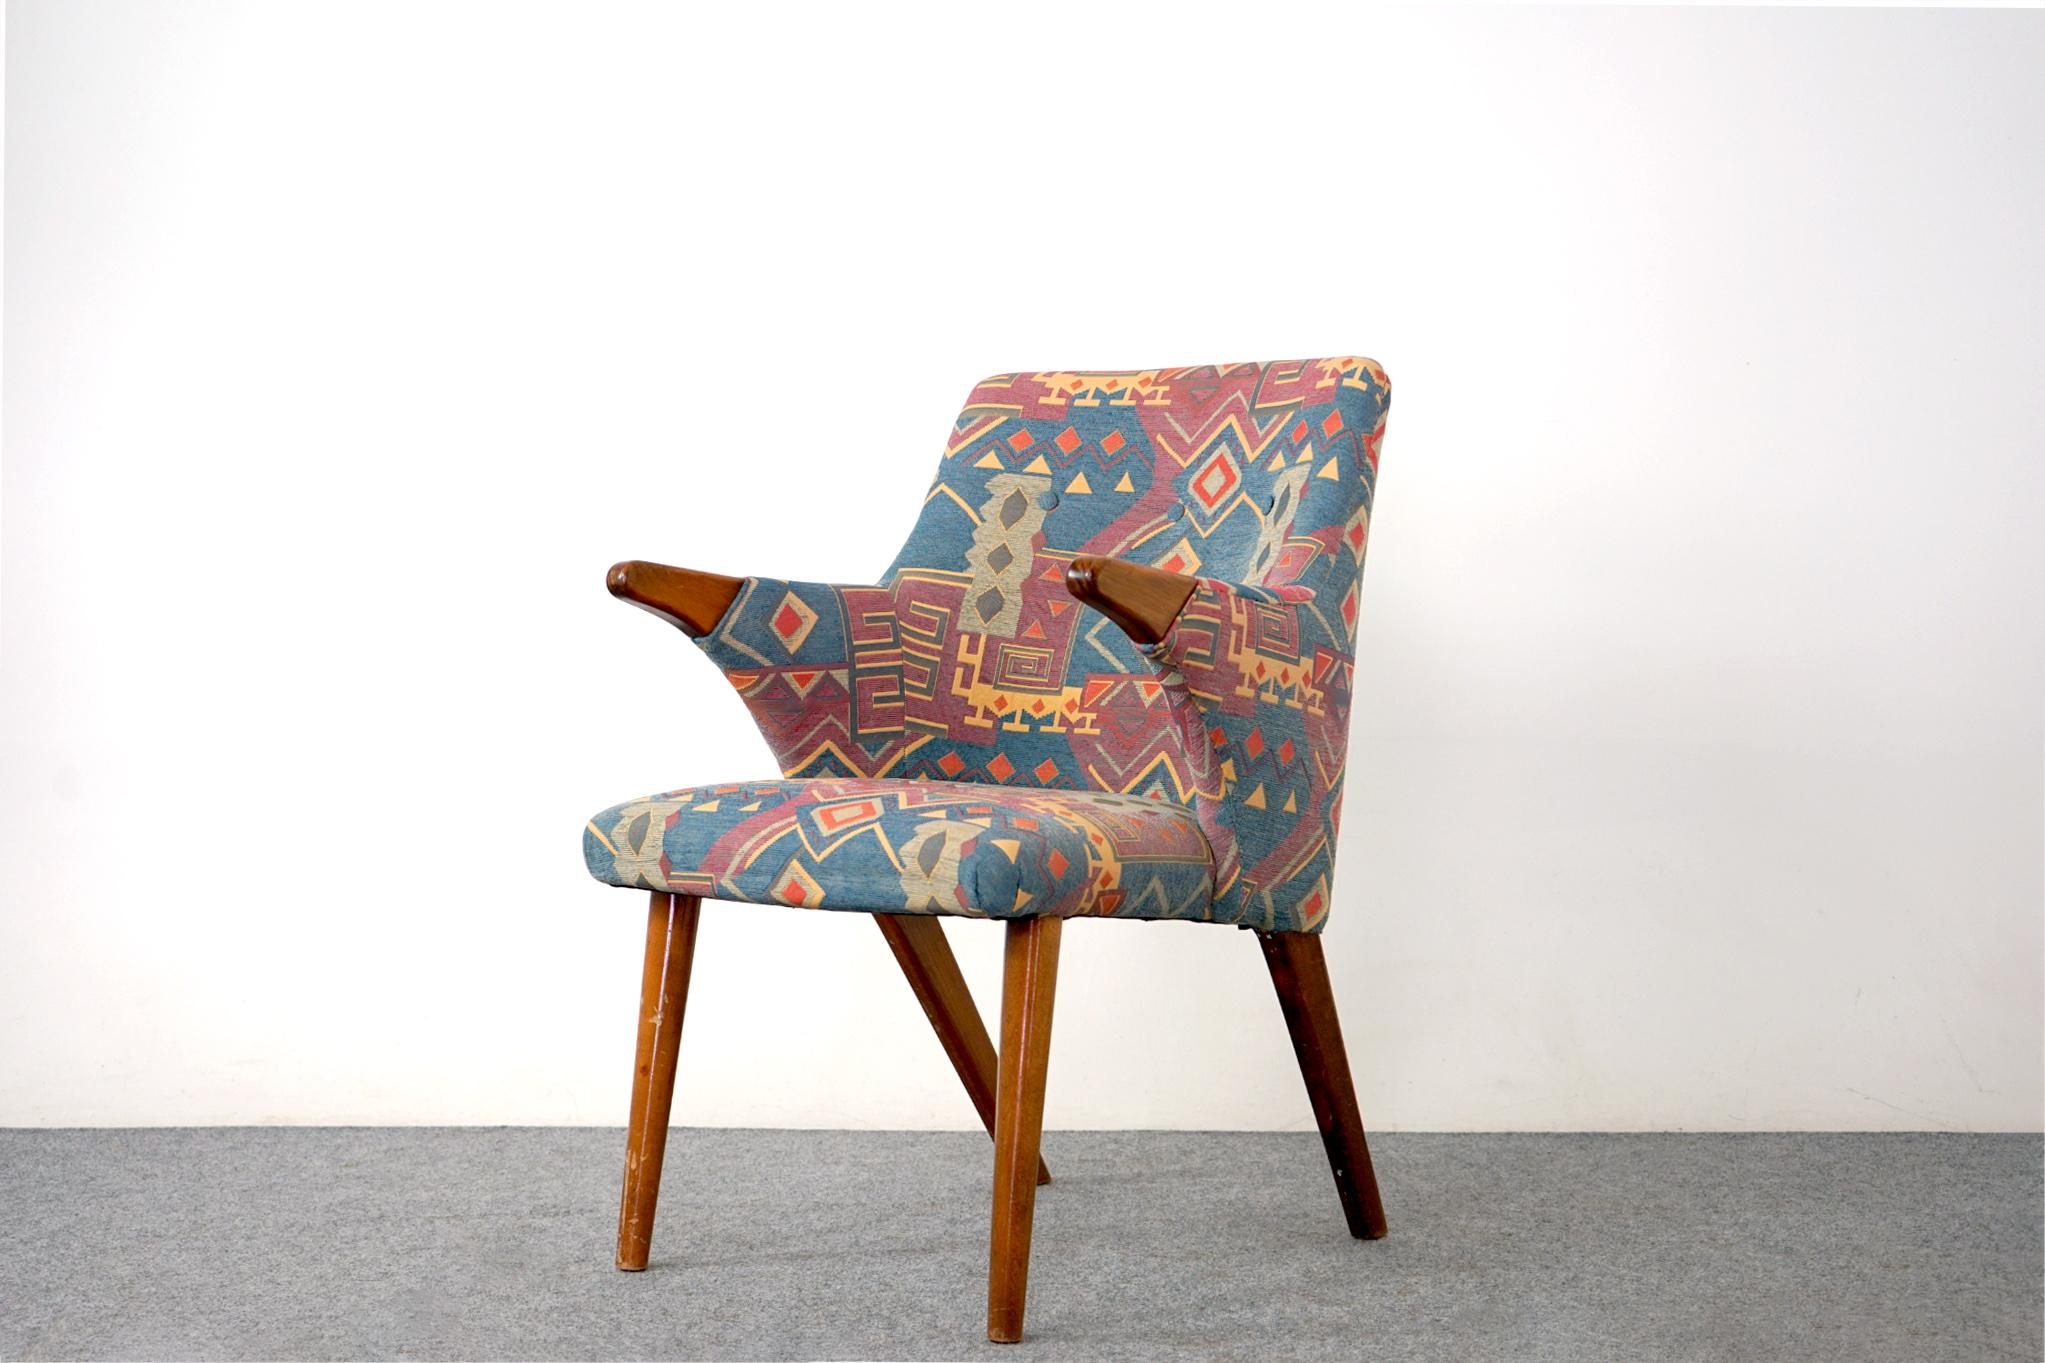 Upholstered mid century arm chair, circa 1960's. Sweet silhouette on this sculpted chair, beech wood hand rests and legs offer great contrast to the fabric. Very comfortable, fabric and foam was recenty updated, years of life in it yet. 

Hand